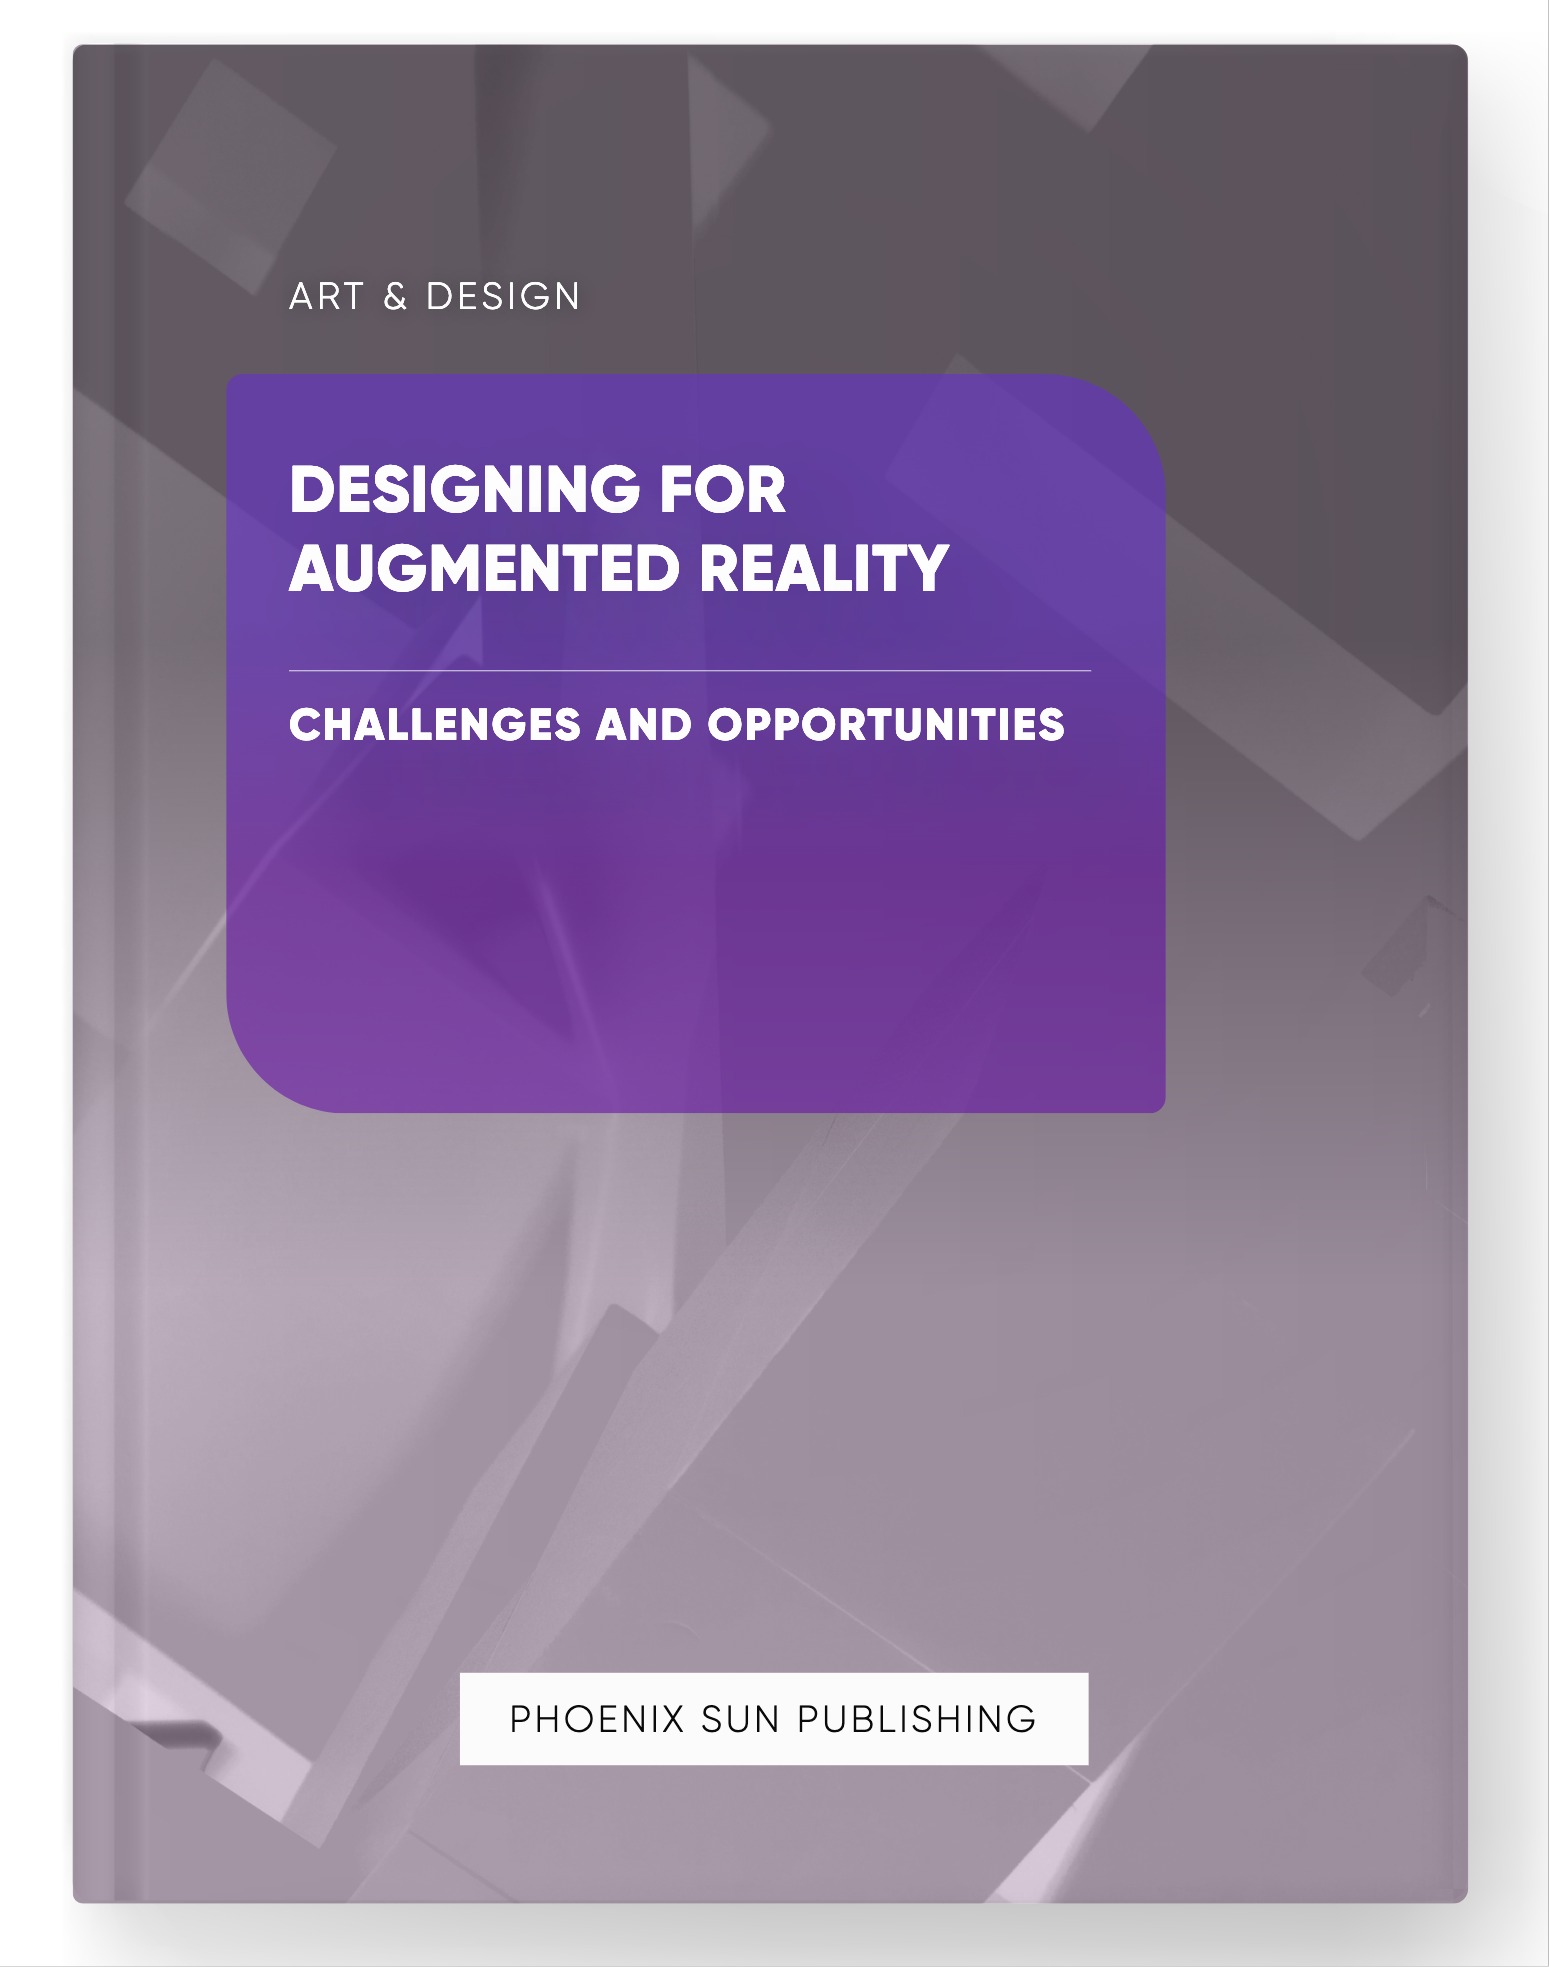 Designing for Augmented Reality – Challenges and Opportunities